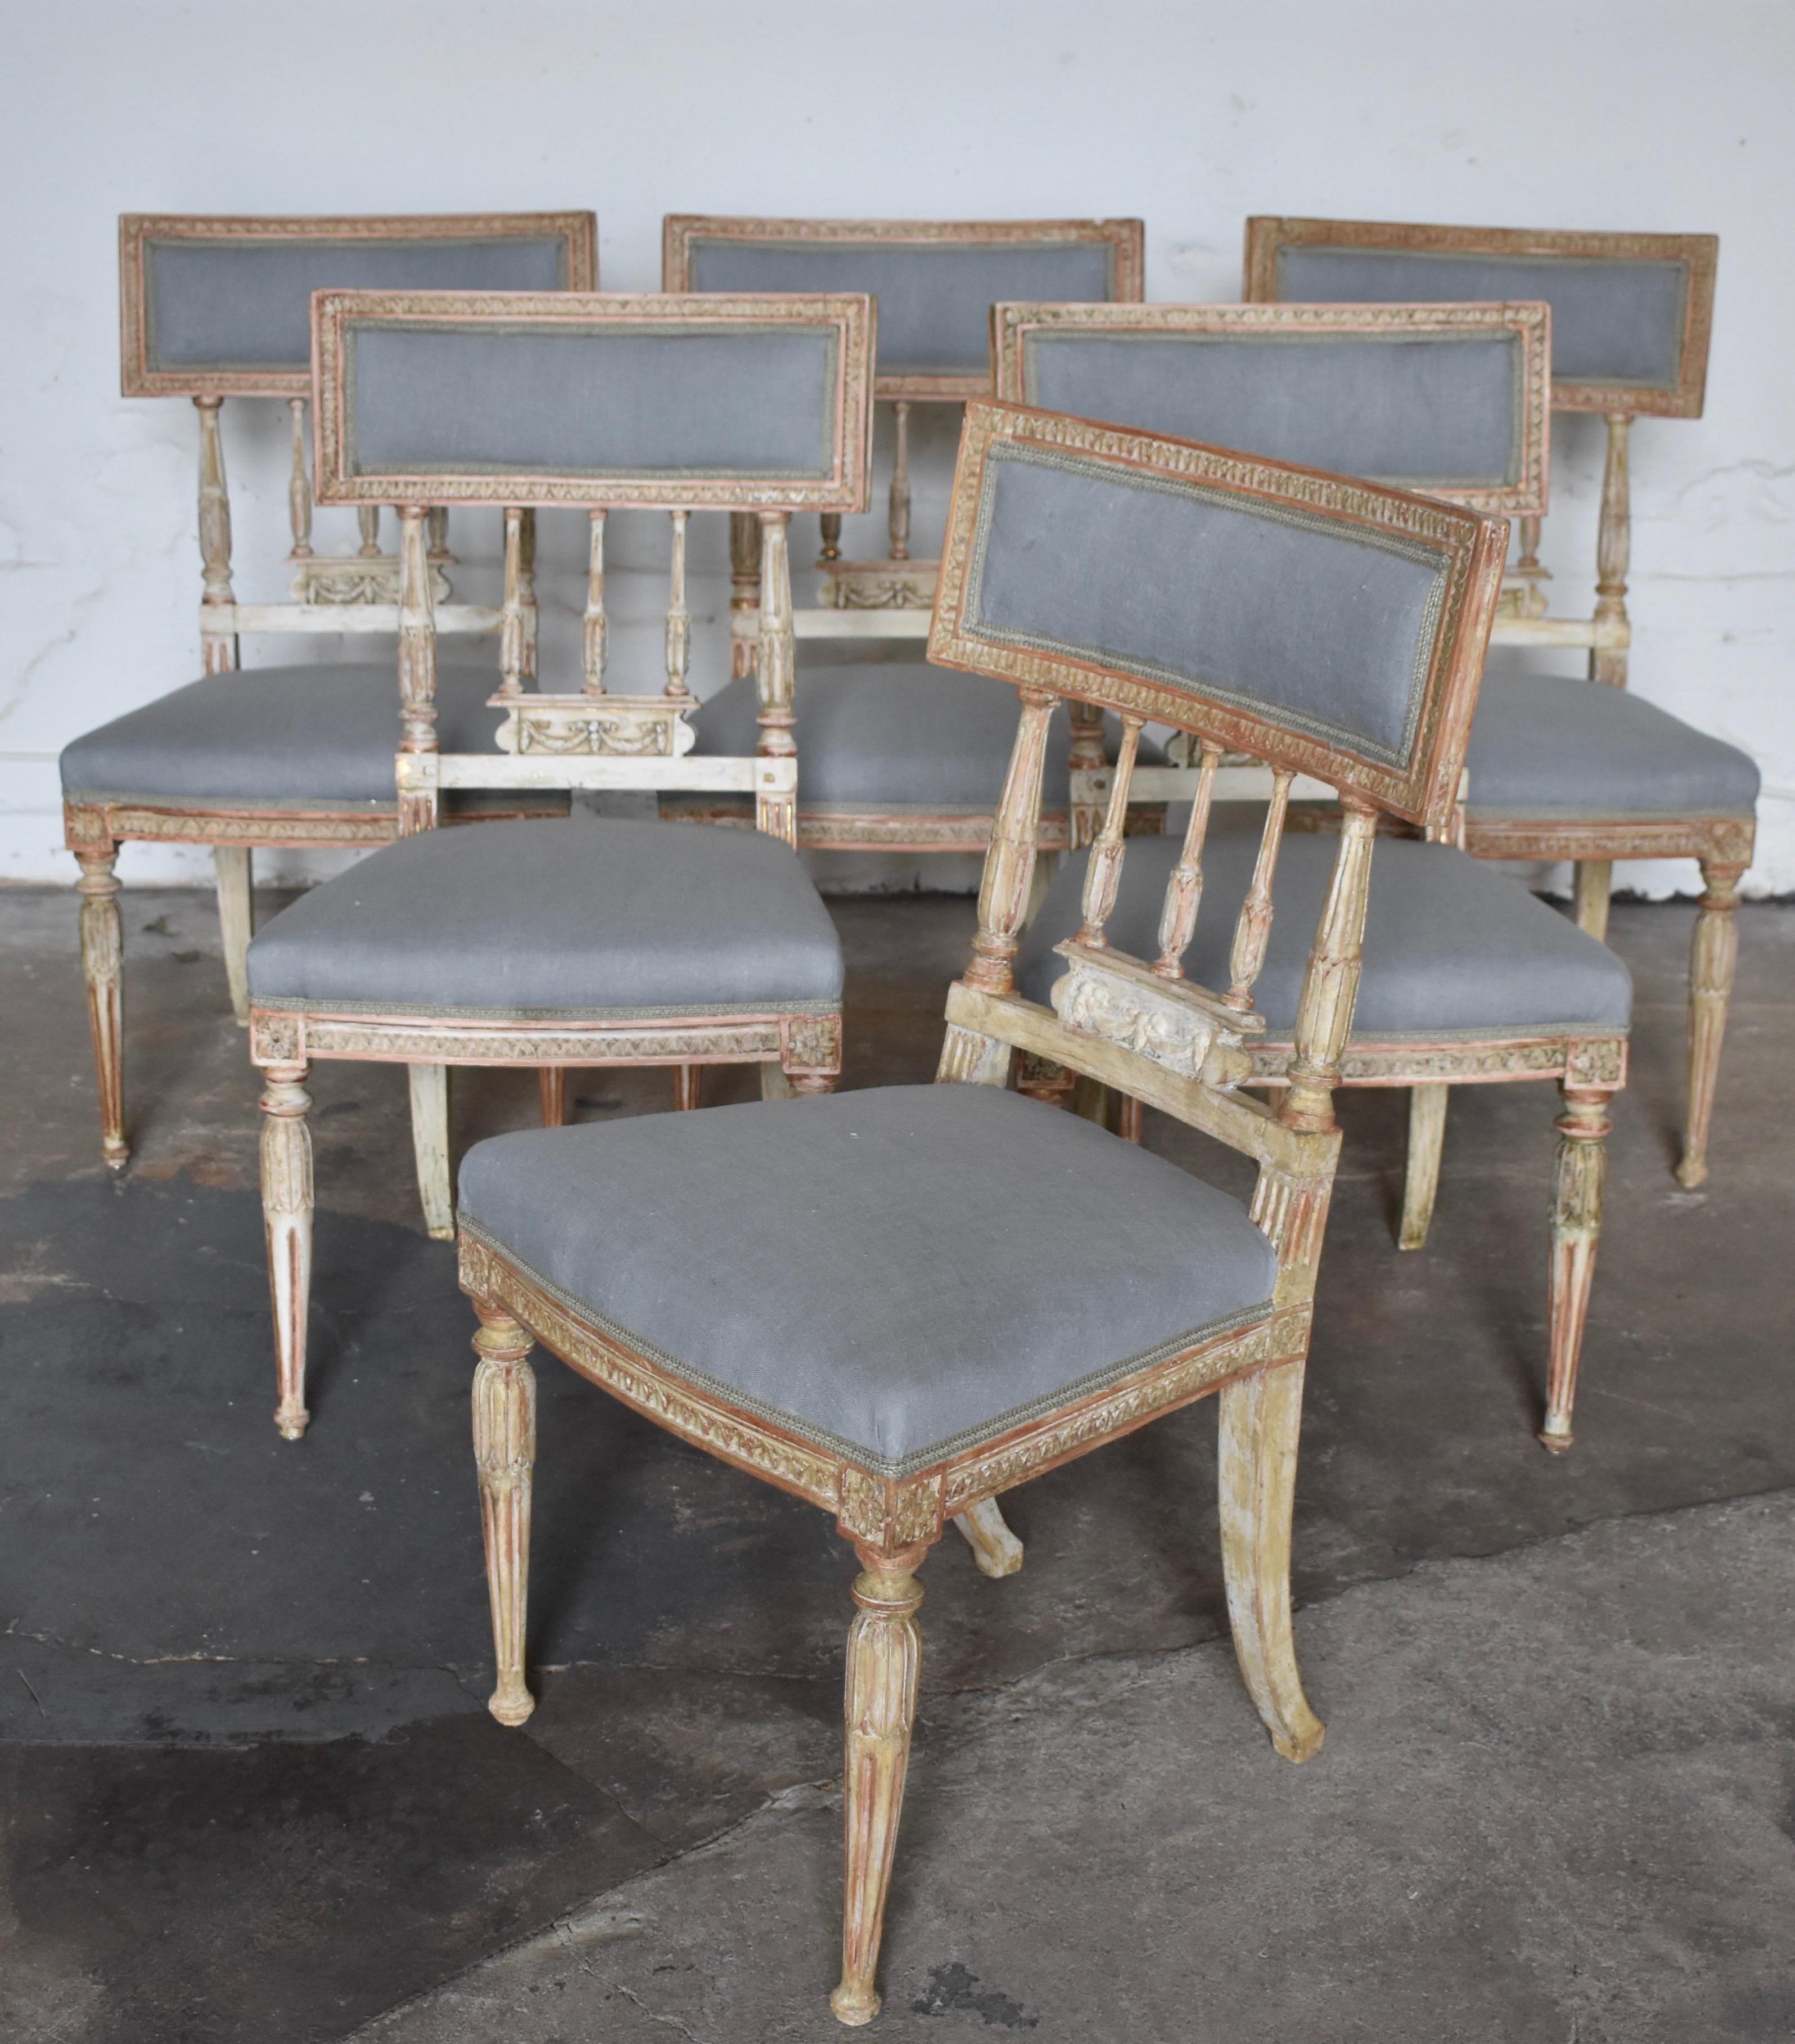 Swedish Late Gustavian Chairs, Set of 6, by Anders Hellman, Signed AHM 2